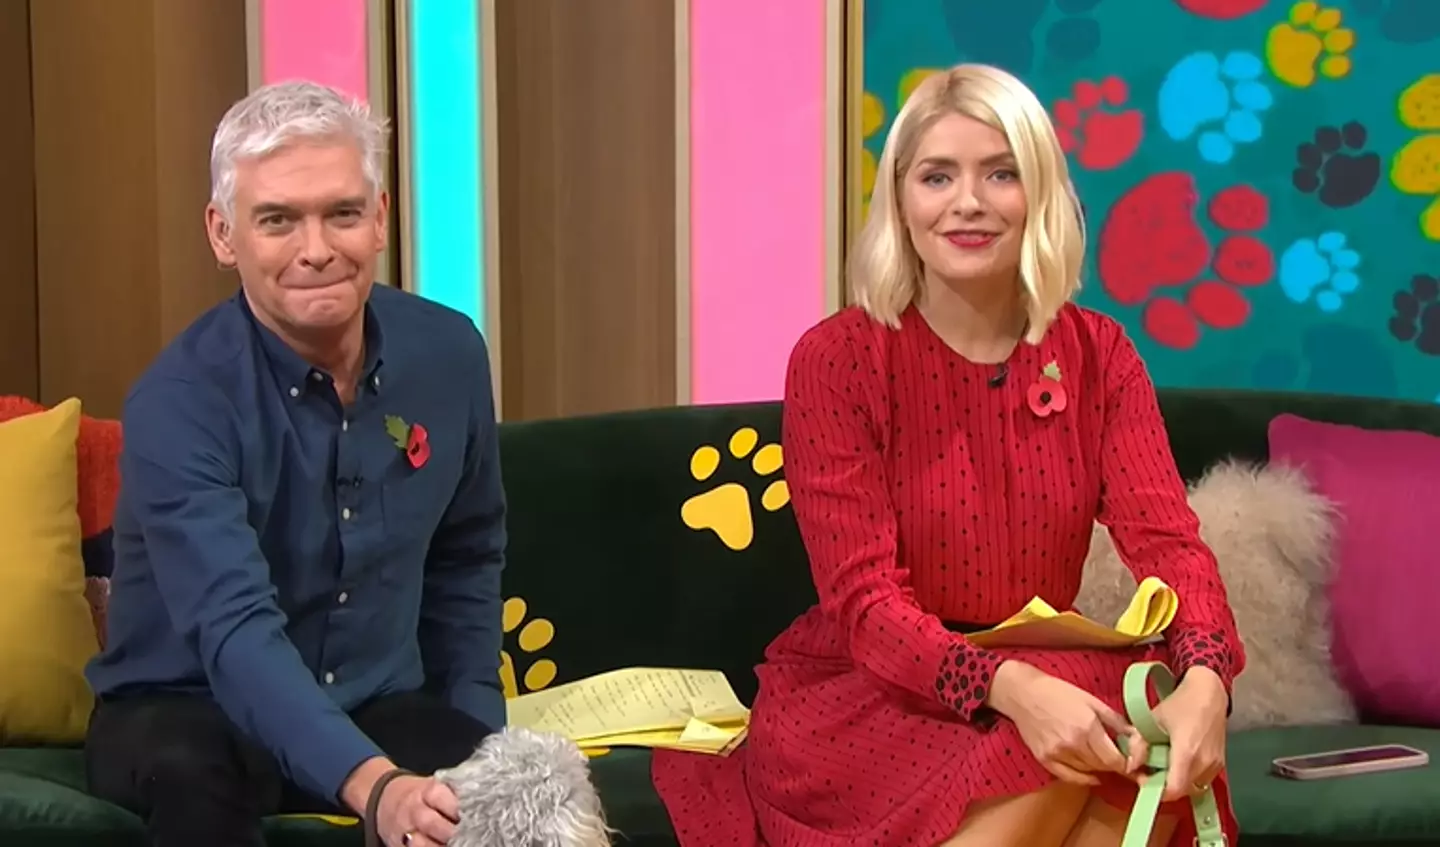 The pair also got to play with dogs in this morning's show. [